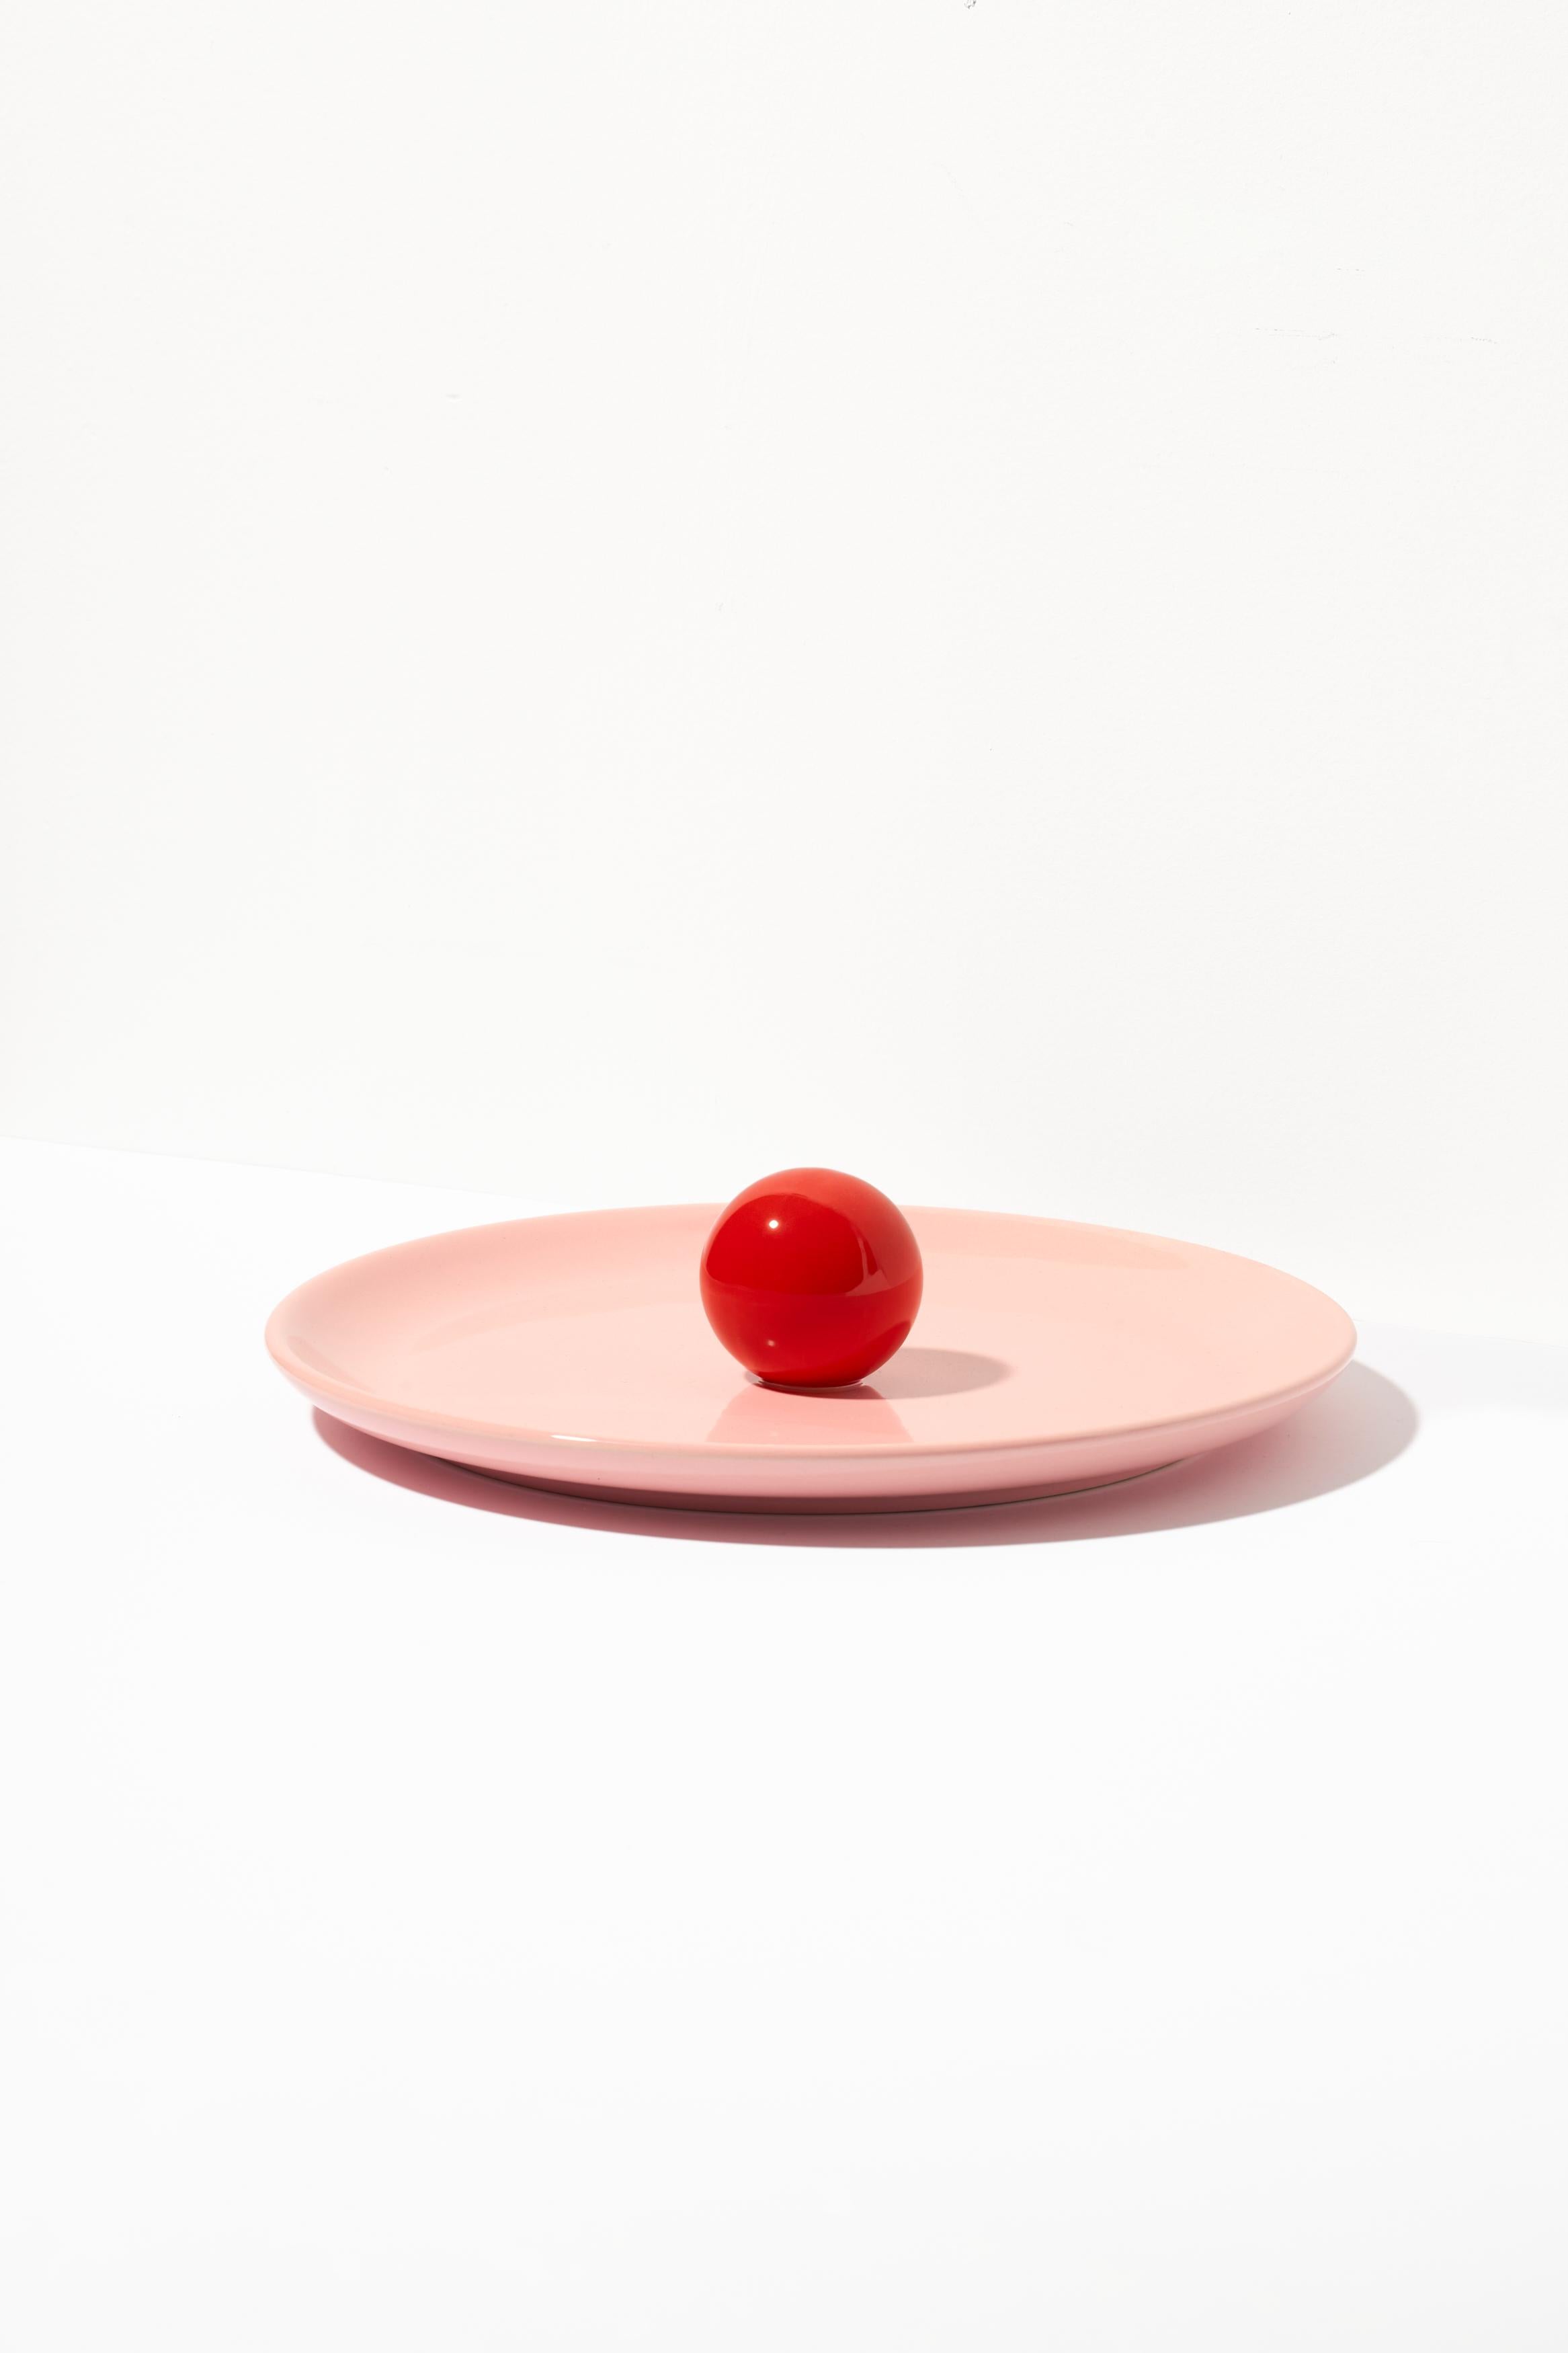 ANIELA can be described in three words: perfect-fruit-plate! Of course, it works just as well for serving sweets or savory snacks. Its wide base and a funny ball-shaped handle gain a distinctive character thanks to the intense glaze color. The